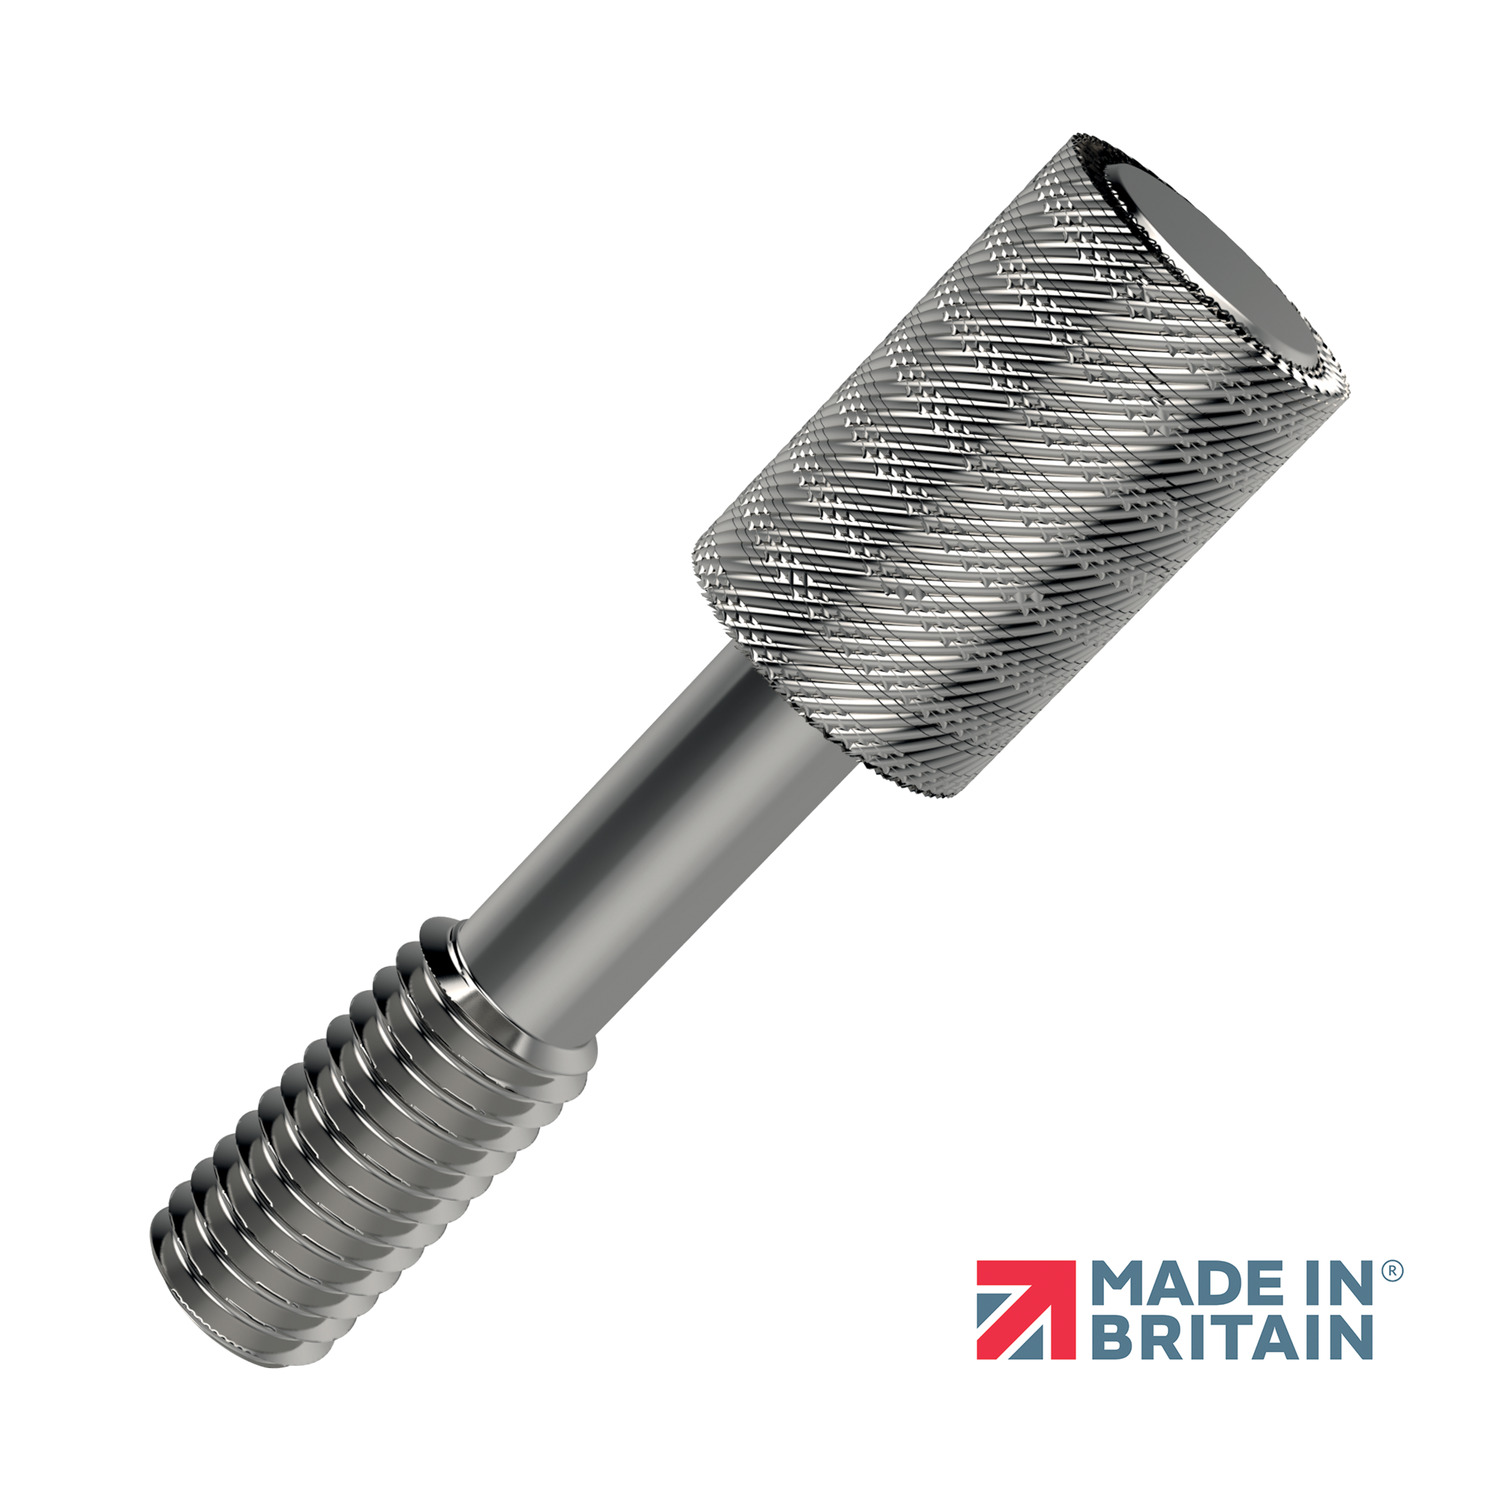 Captive Thumb Screws Captive thumb screw in stock in AISI 303 and 316 series stainless steel. Titanium version also available (more expensive). This is a special thin diameter version, also available with a black finish. See our range of captive screws here.